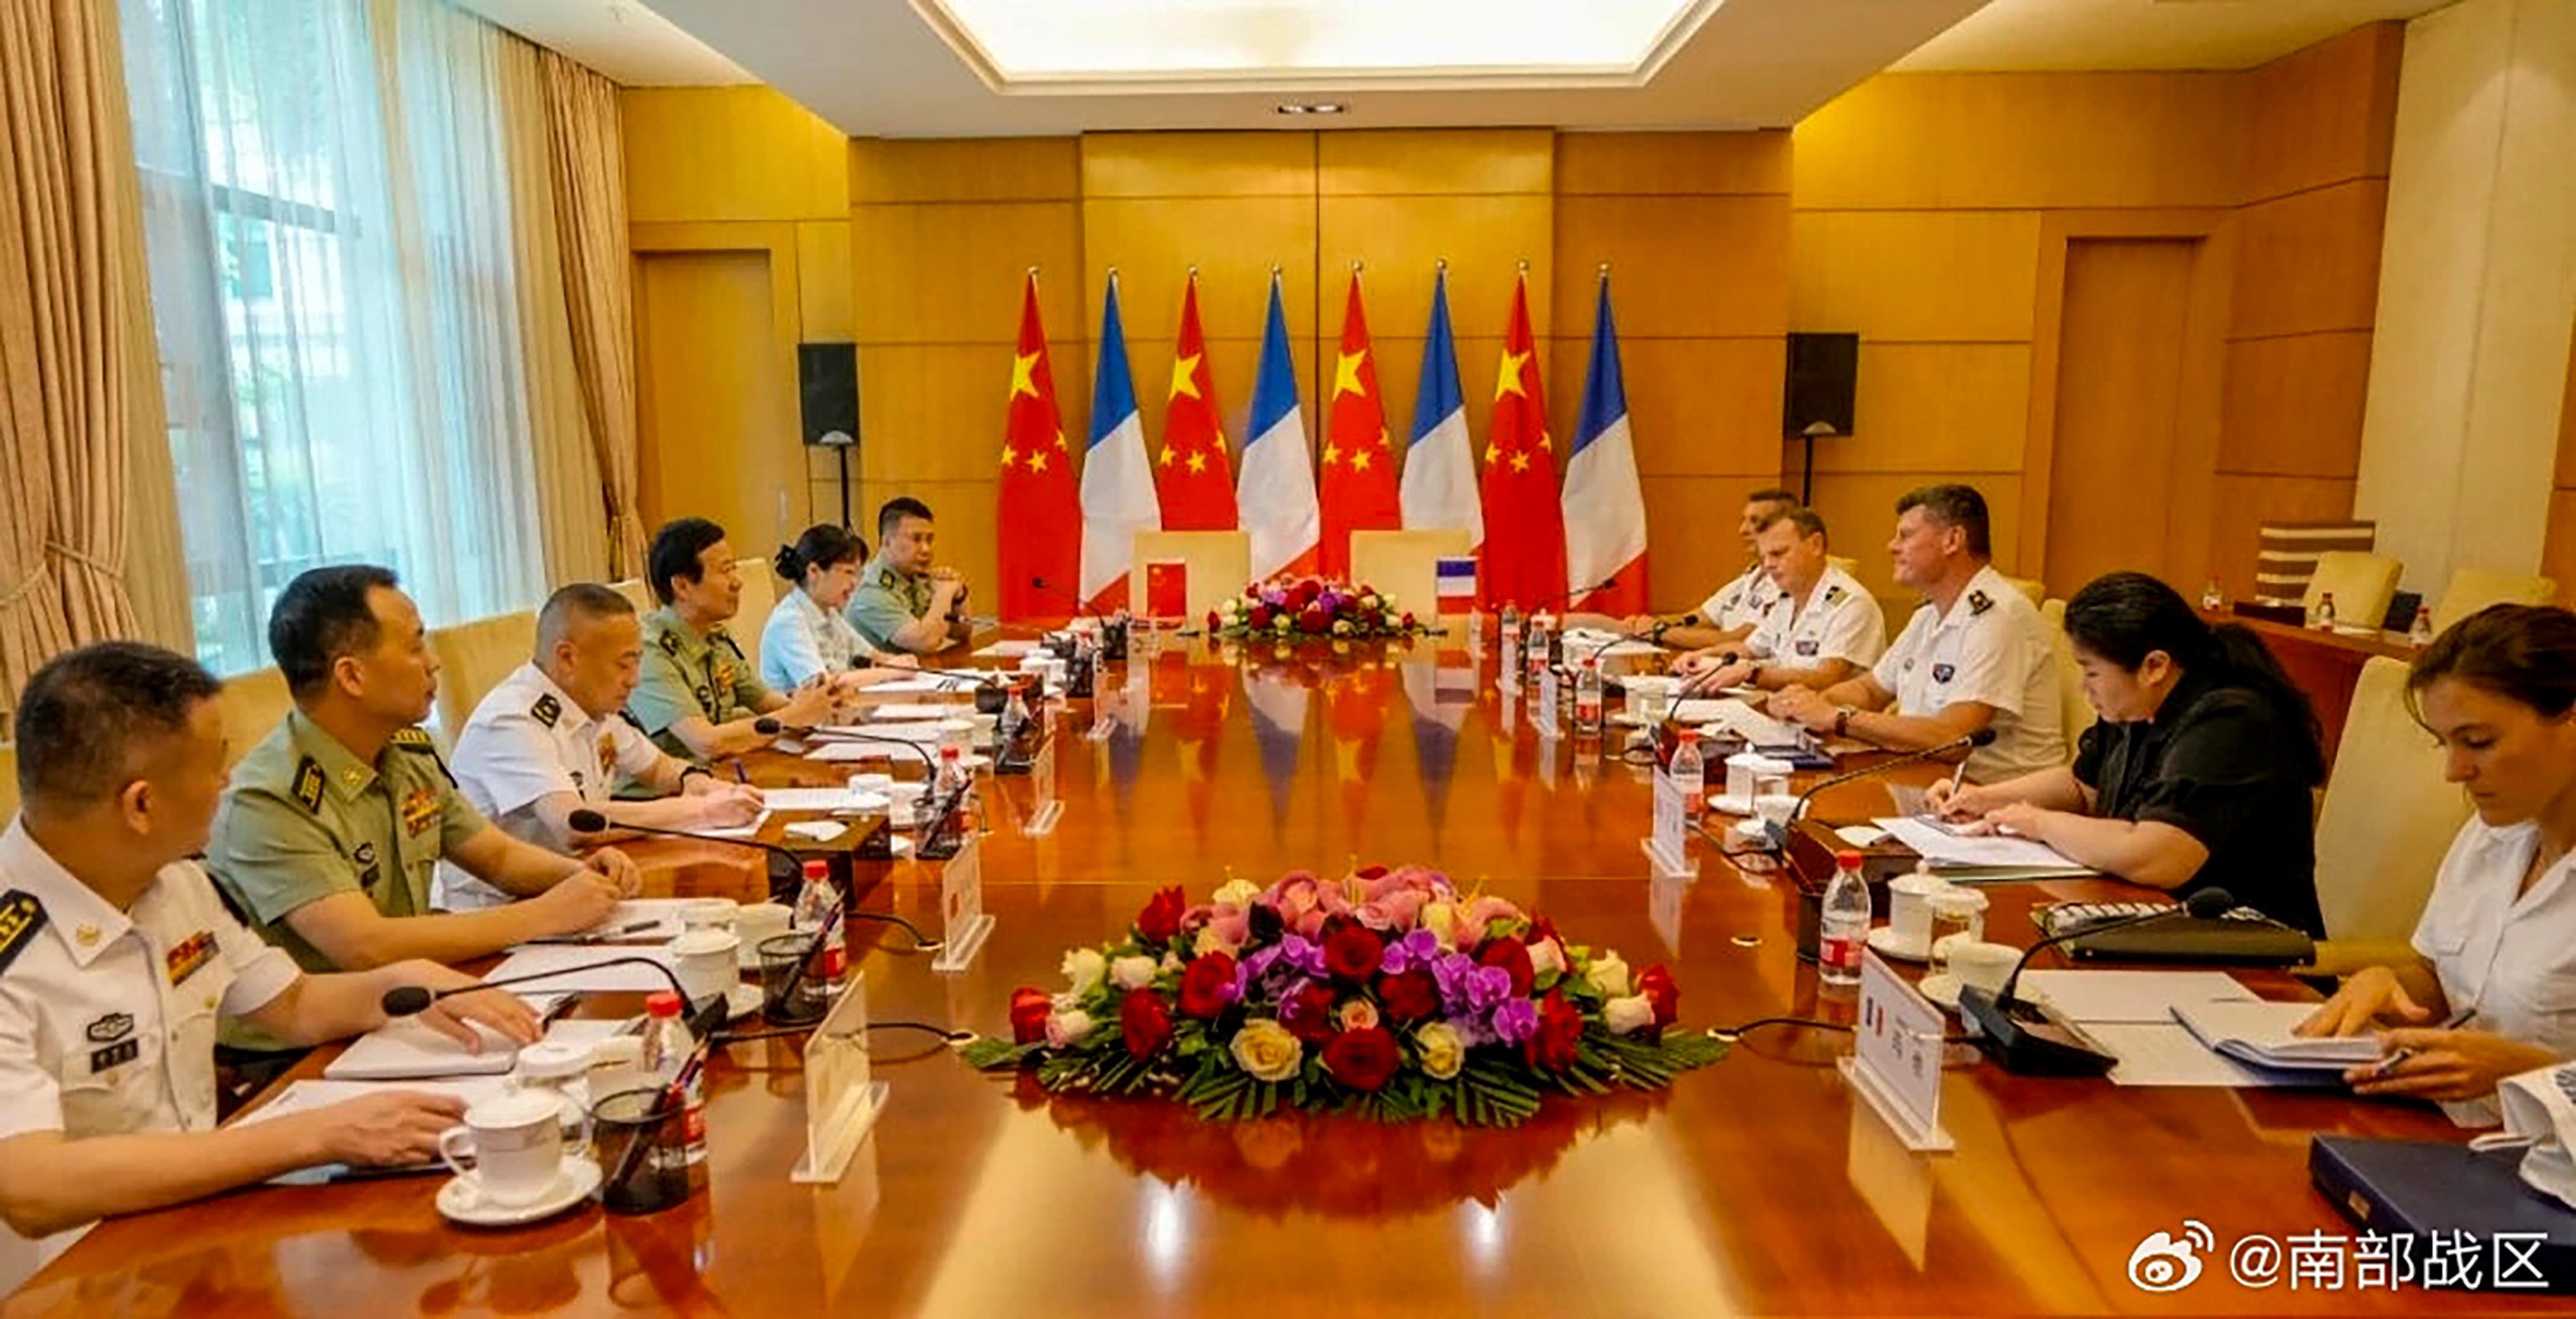 The naval and air forces of China and France have set up a new inter-theatre cooperation and dialogue mechanism. Photo: Handout